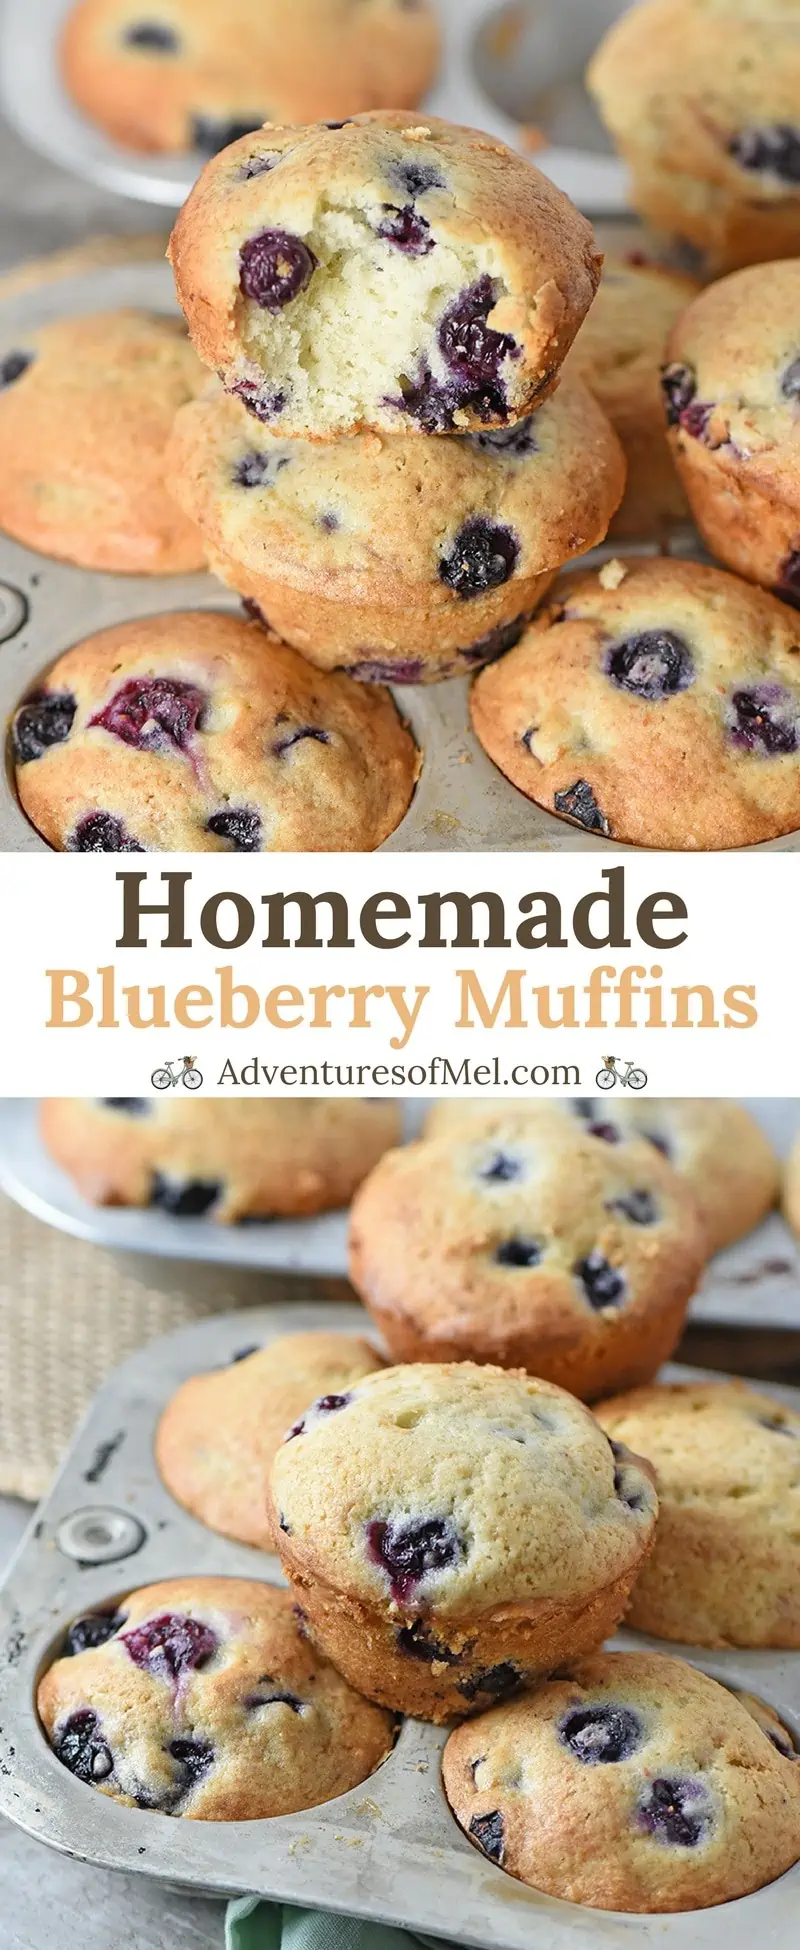 Homemade Blueberry Muffins from scratch are a breakfast sweet treat my boys really enjoy. Made with simple ingredients like butter, sour cream, and blueberries, this recipe is quick and easy to make. And the muffins are moist and delicious!